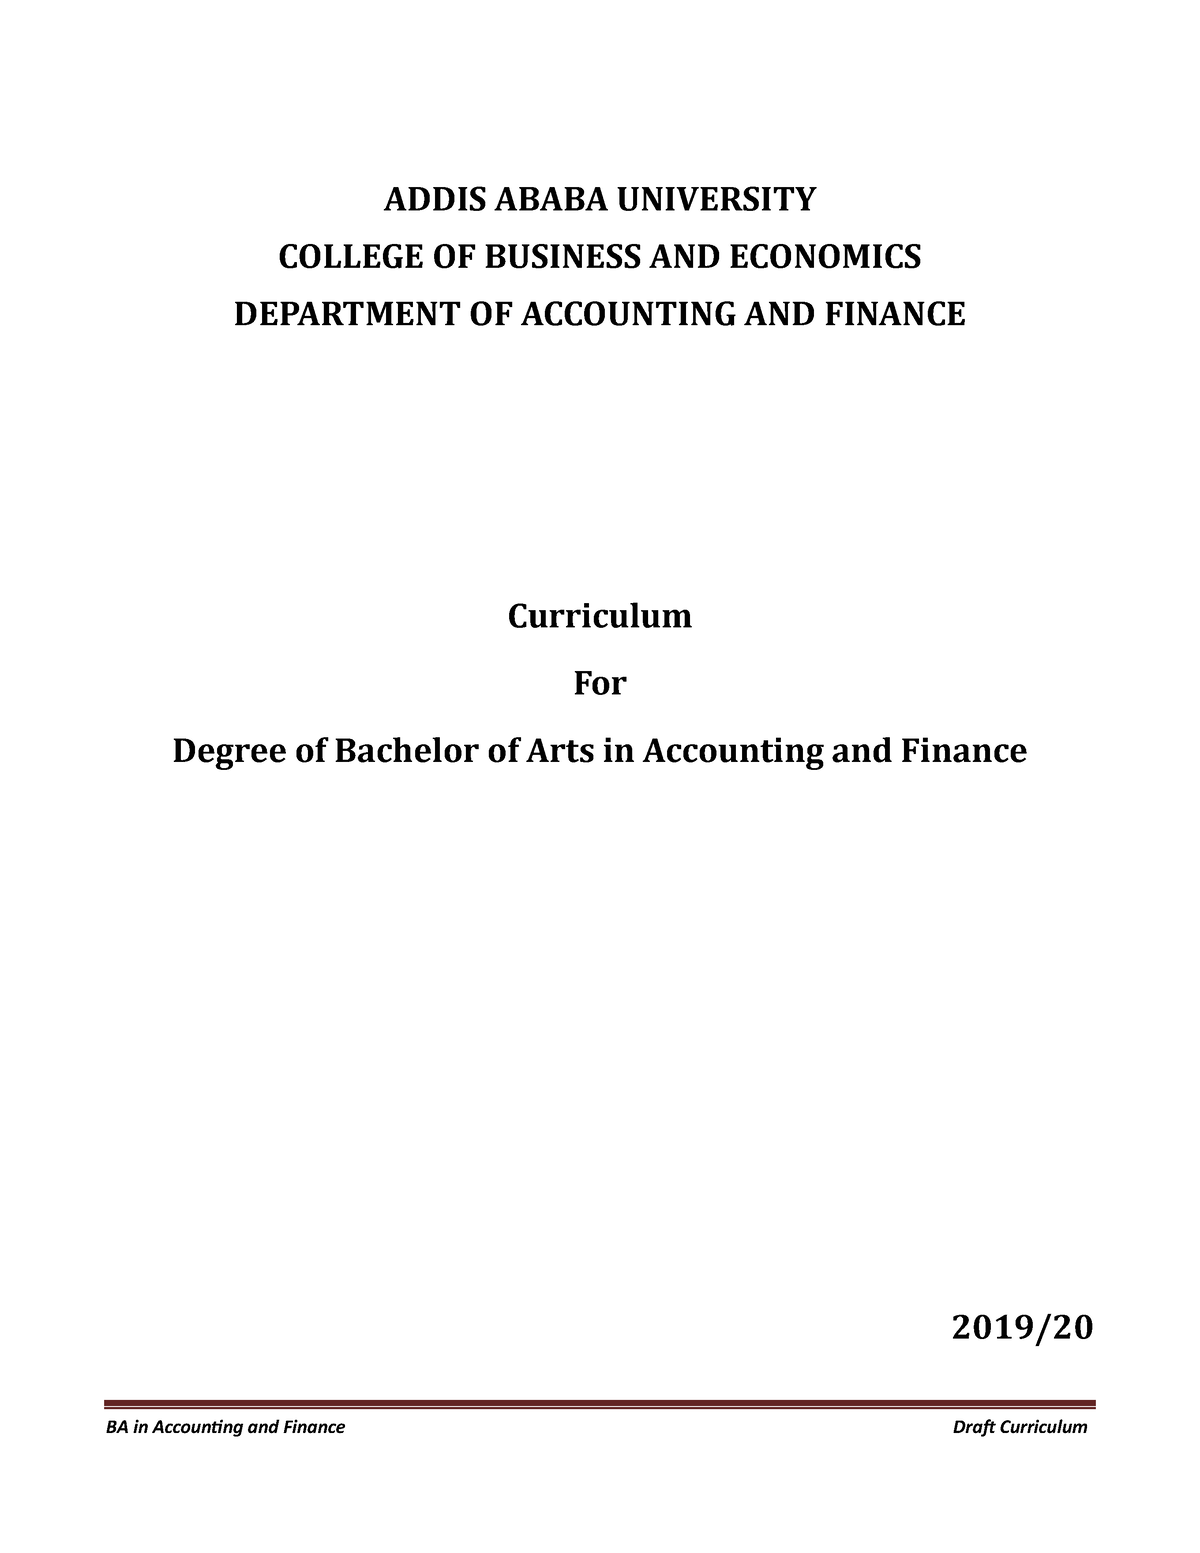 addis ababa university accounting research paper pdf download